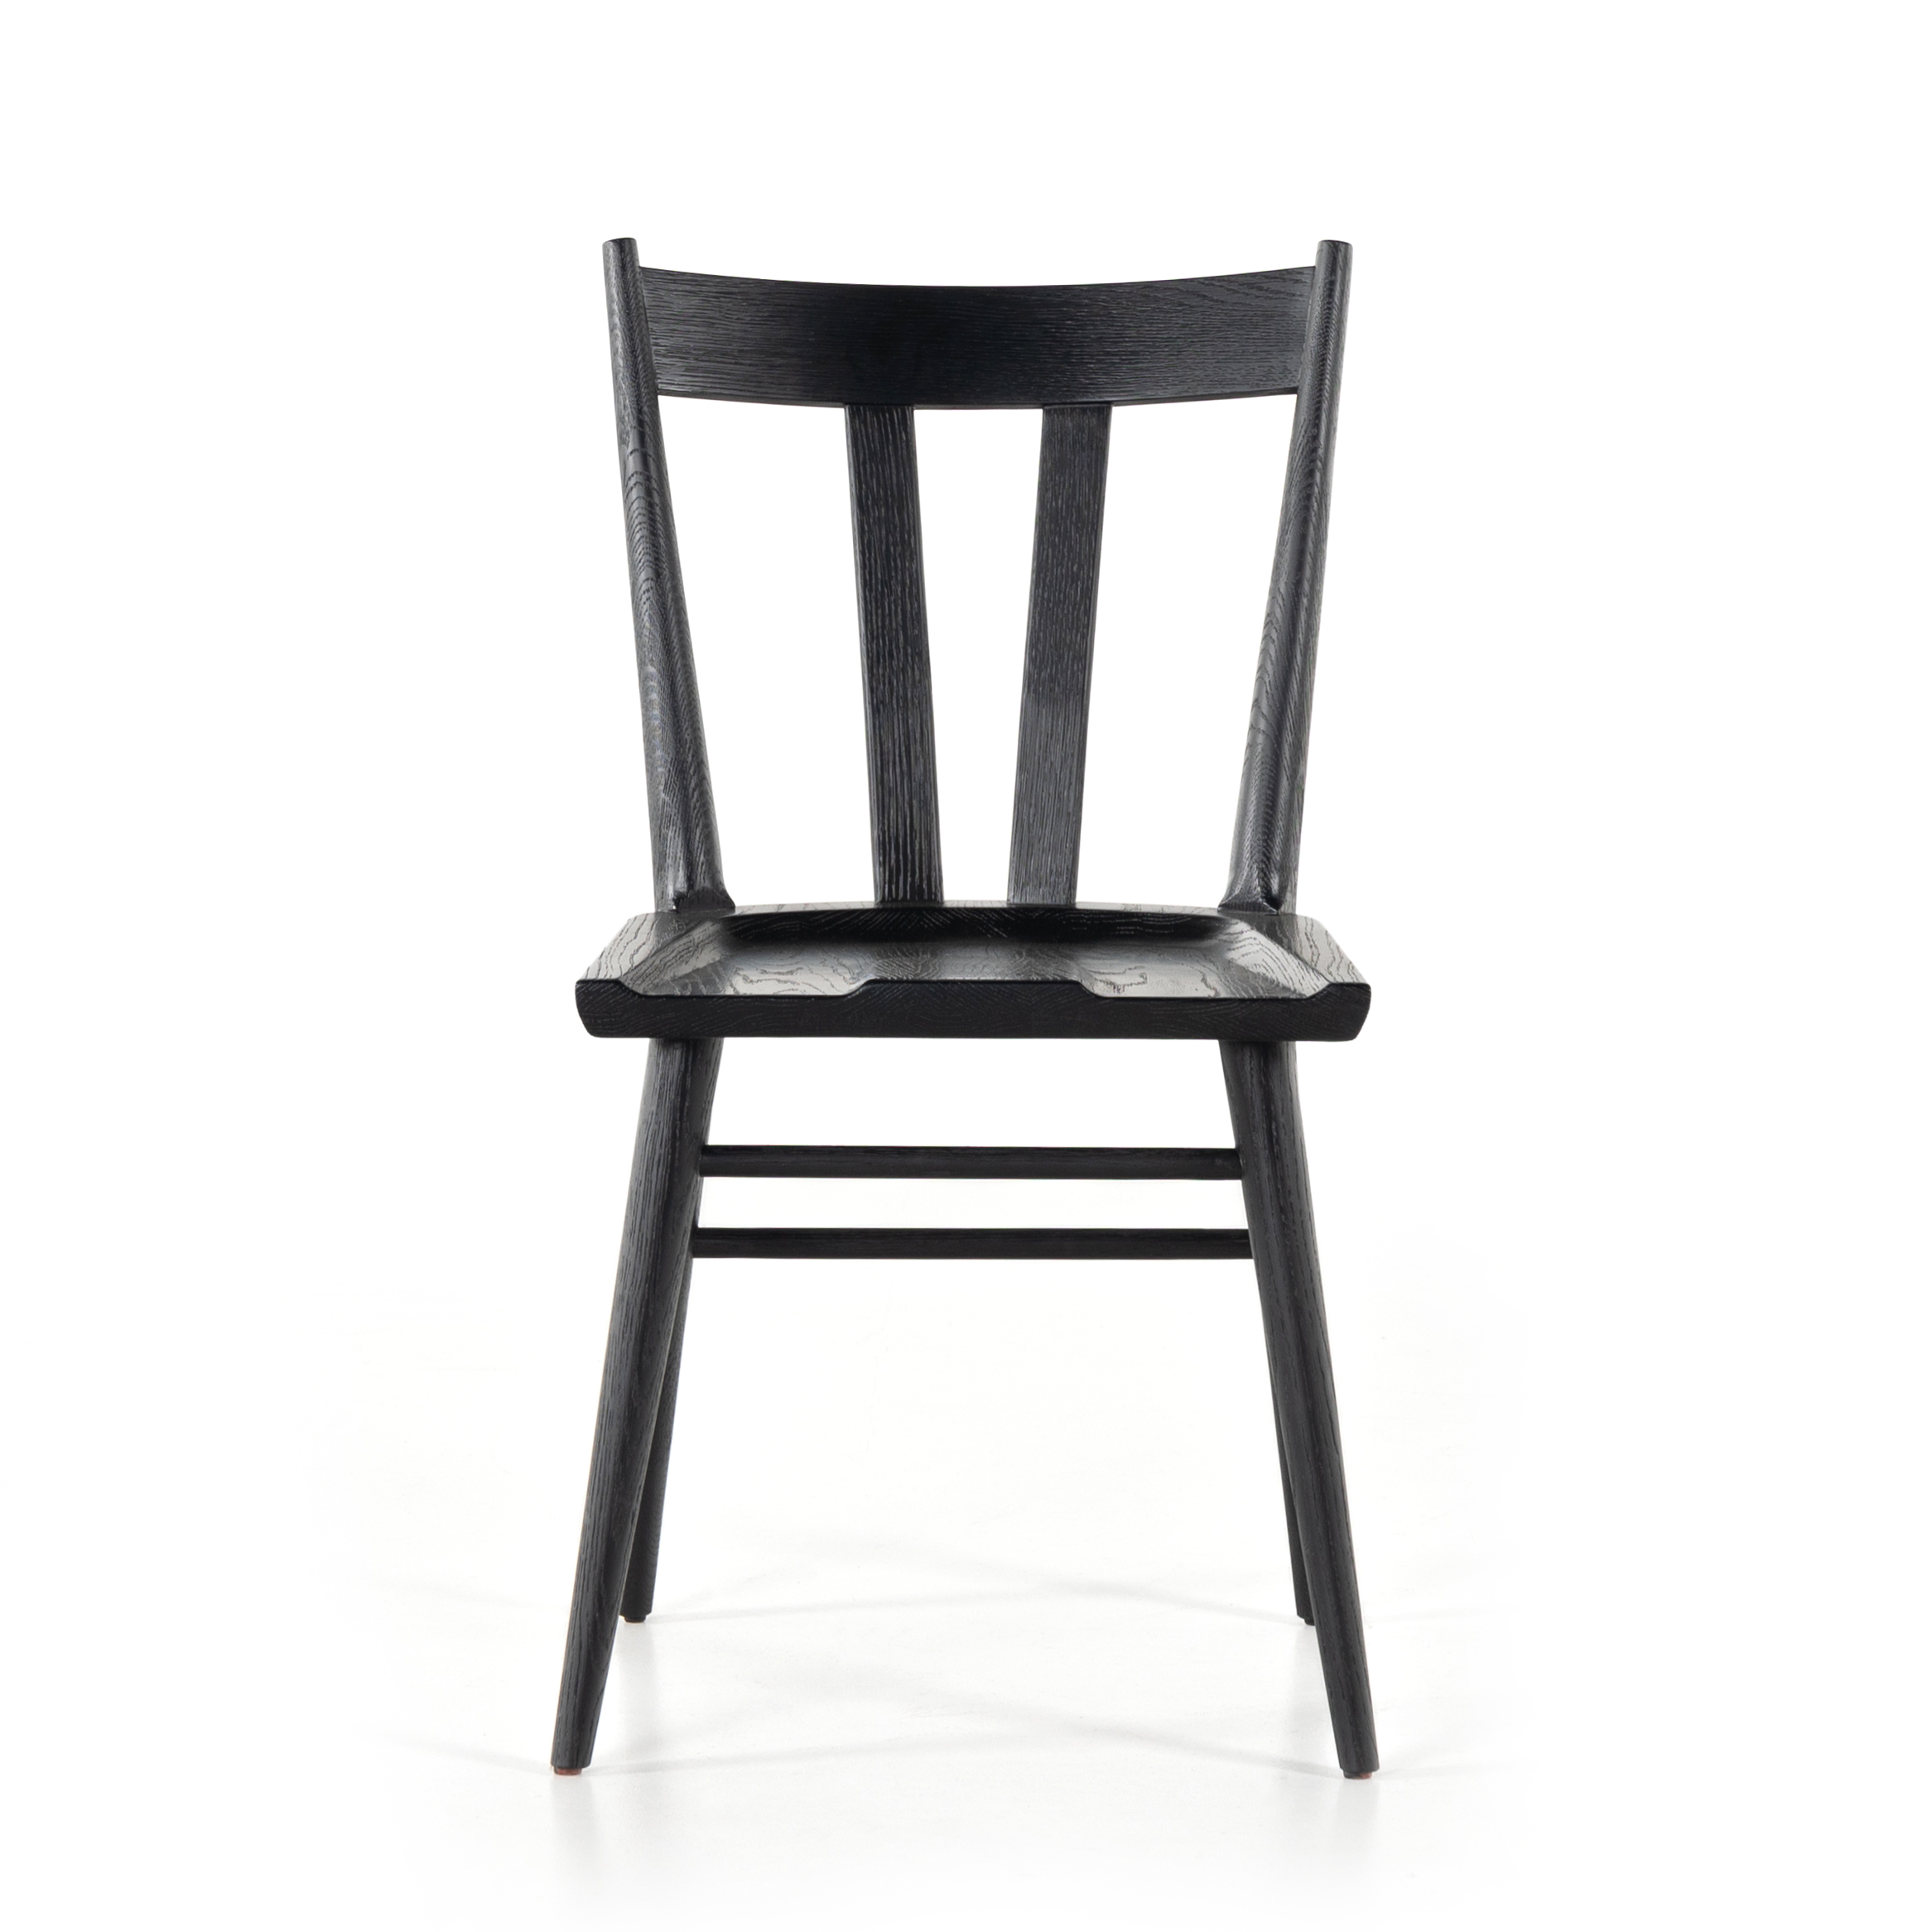 Finished in a beautifully classic black oak, the Gregory Black Oak Dining Chair features a yoke-like back and widened supports, placing a fresh twist on the traditional Windsor. Amethyst Home provides interior design, new construction, custom furniture, and rugs for the Omaha metro area.